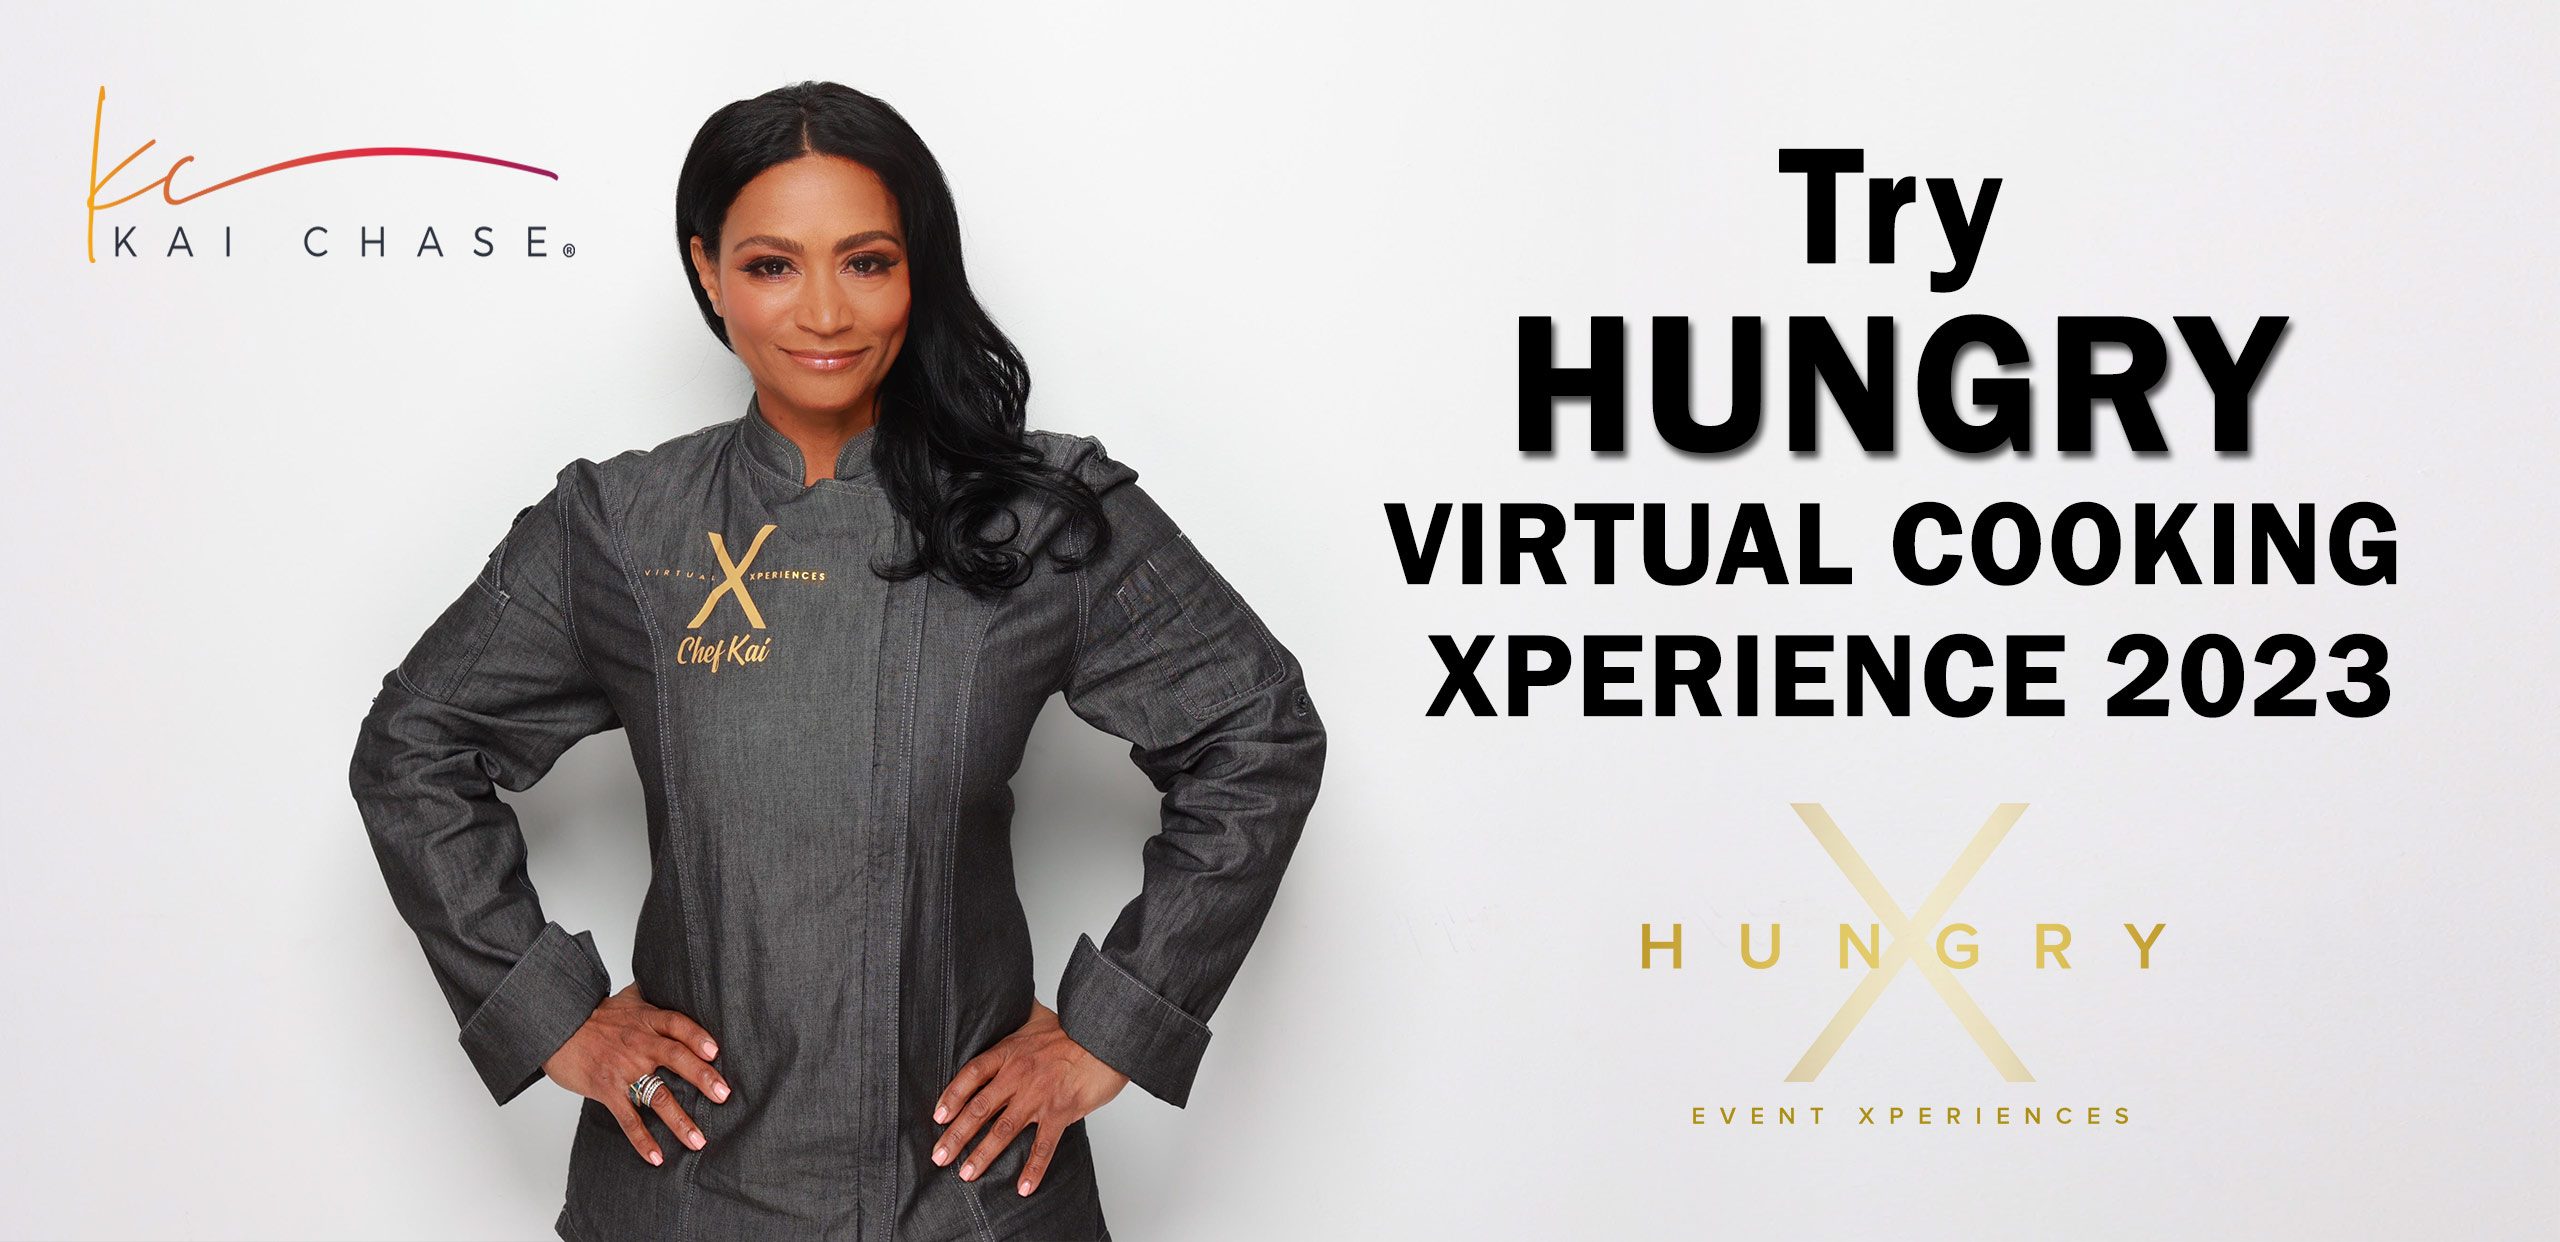 Try HUNGRY Virtual Cooking Experiences with Chef Kai Chase